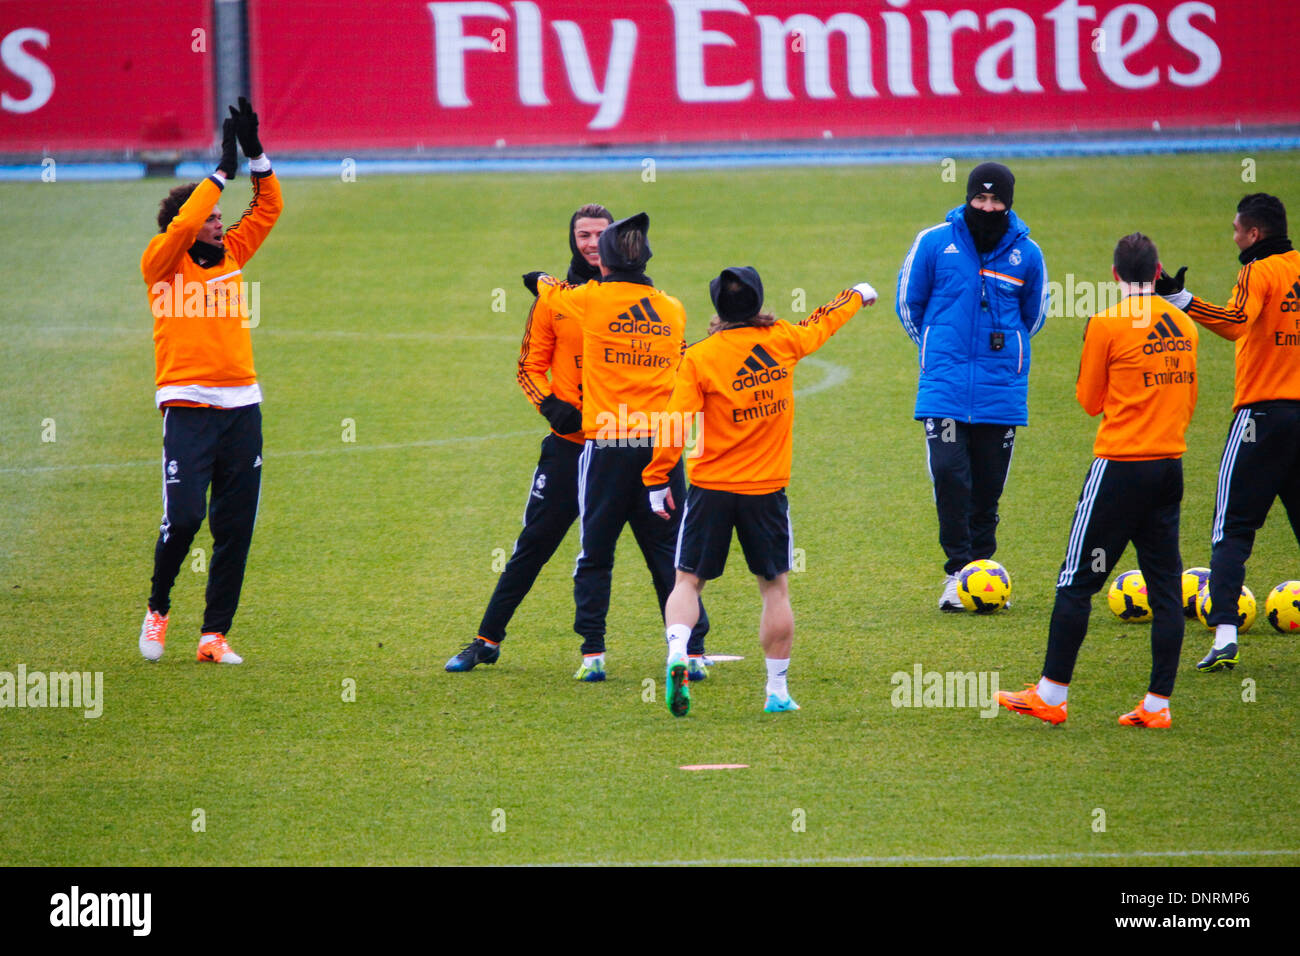 Madrid, Spain. 5th Jan, 2014. (From left to right) Pepe, Cristiano Ronaldo, Coentrao, Modric, Bale and Casemiro at a Real Madrid training session at the Valdebebas sports complex ahead of the Liga match between Real Madrid and Celta Vigo, on January 5th, 2014 in Madrid, Spain Credit:  Madridismo Sl/Madridismo/ZUMAPRESS.com/Alamy Live News Stock Photo